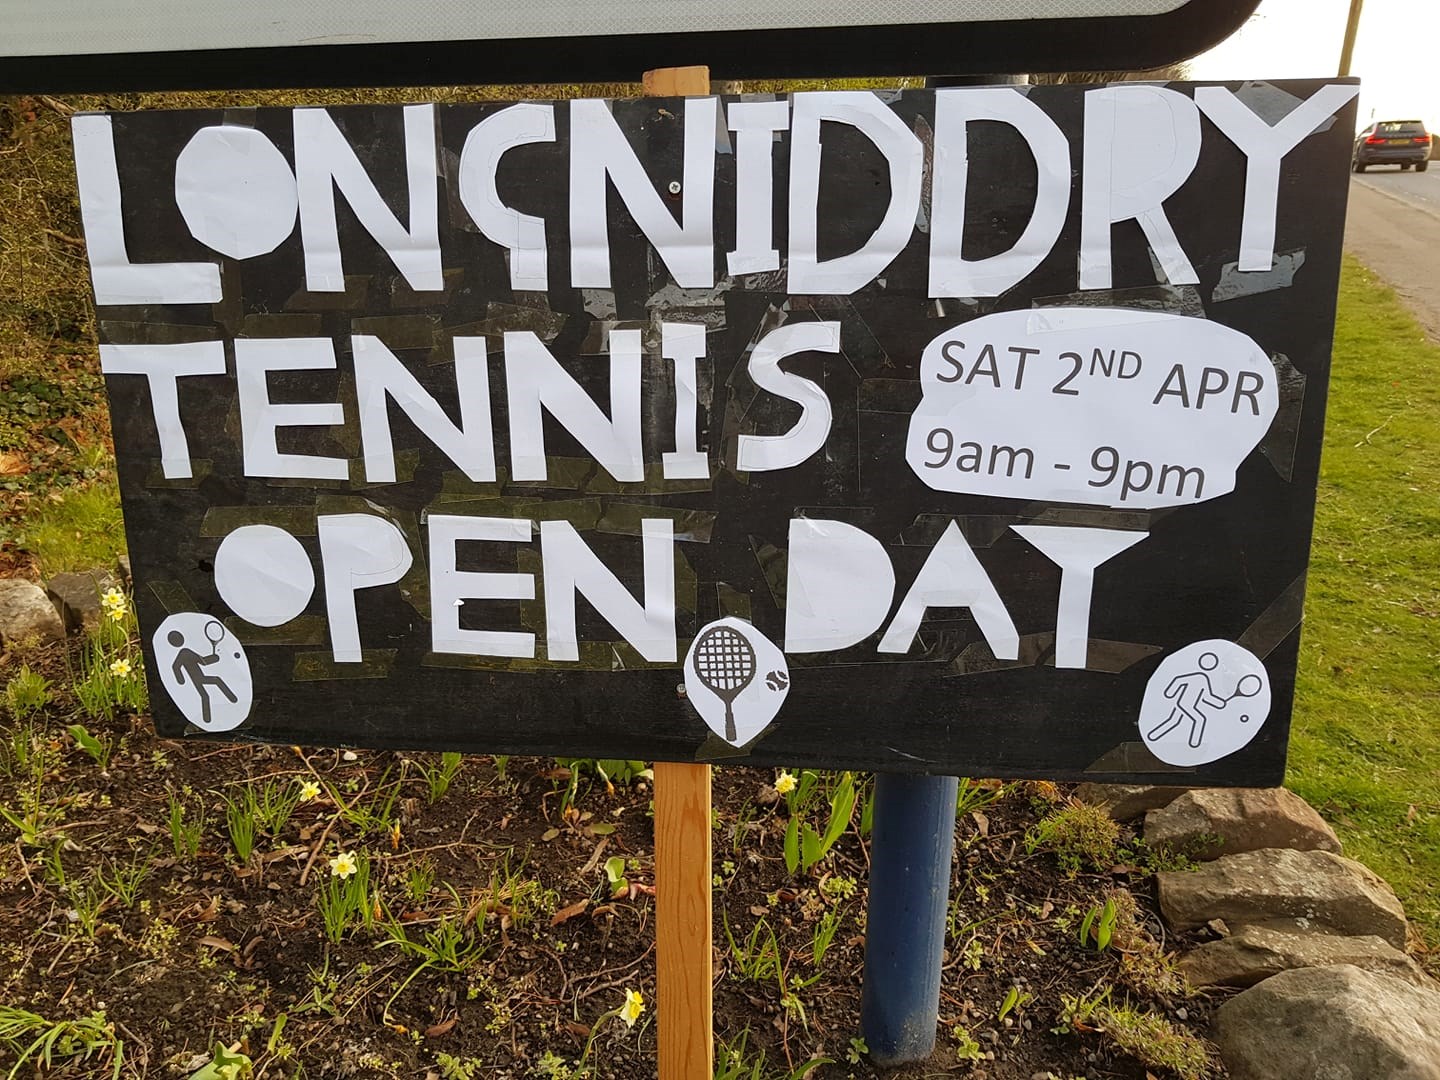 A sign created to promote Longniddry Tennis Club's Open Day